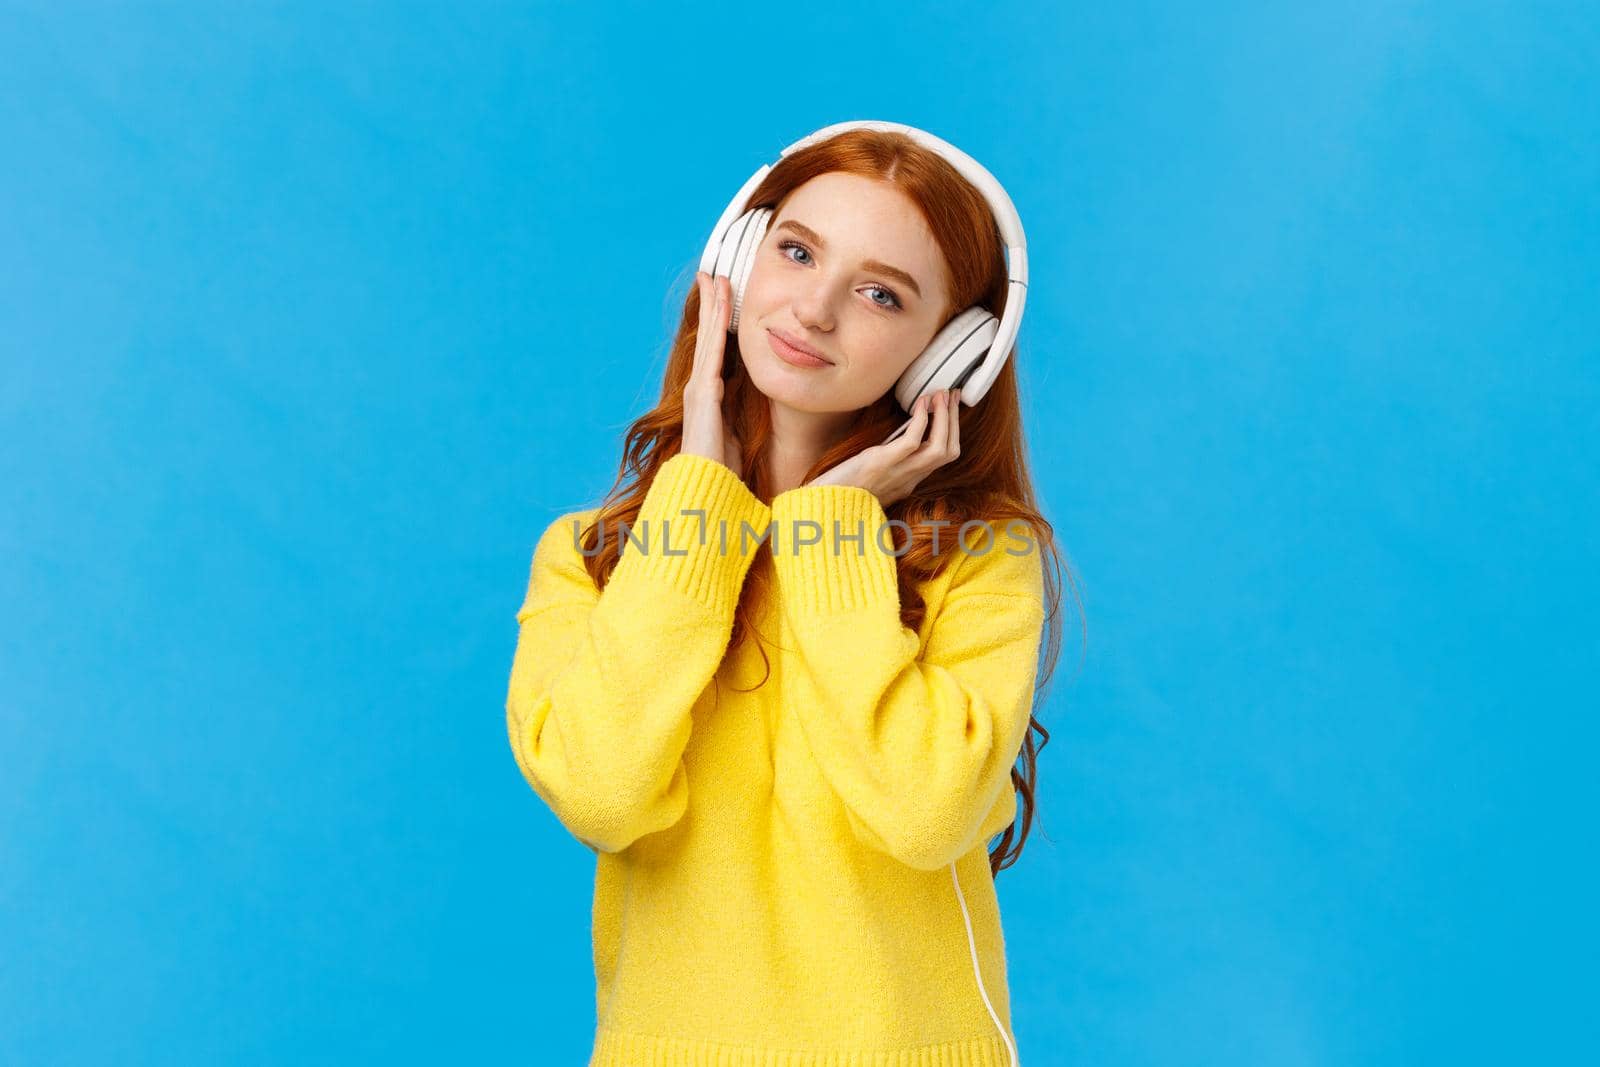 Waist-up shot tender and cute, lovely redhread woman in yellow sweater, tilt head, wear headphones, touching earphones as press to ears, listen music, smiling camera delighted, blue background.